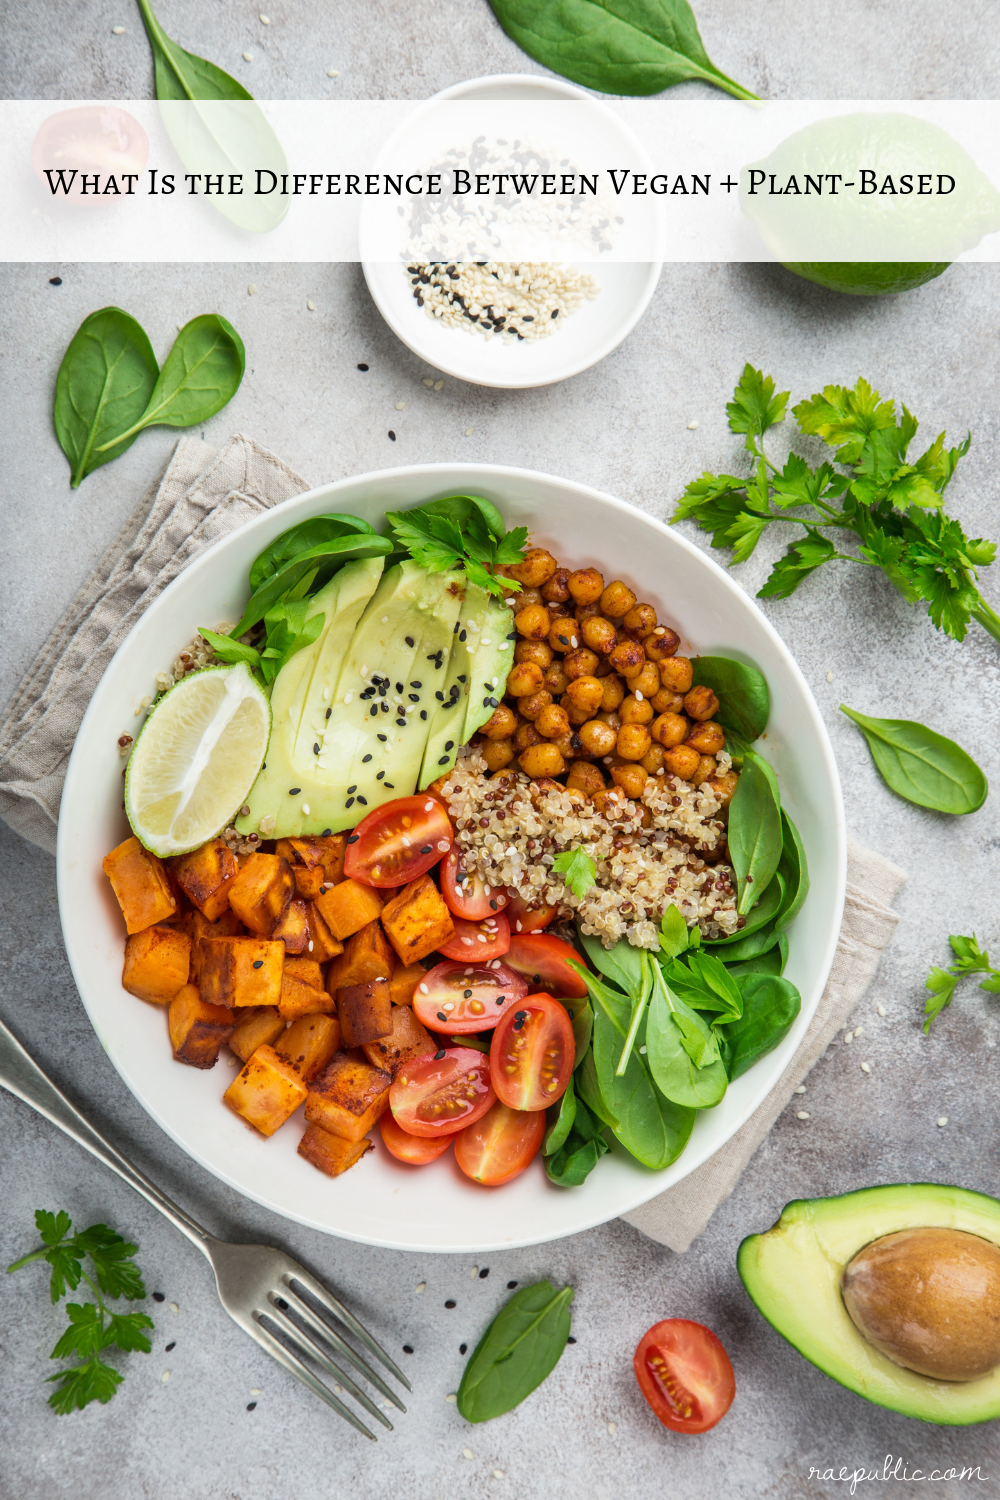 What is the difference between a plant-based diet, a vegan diet, and a plant-based vegan diet?